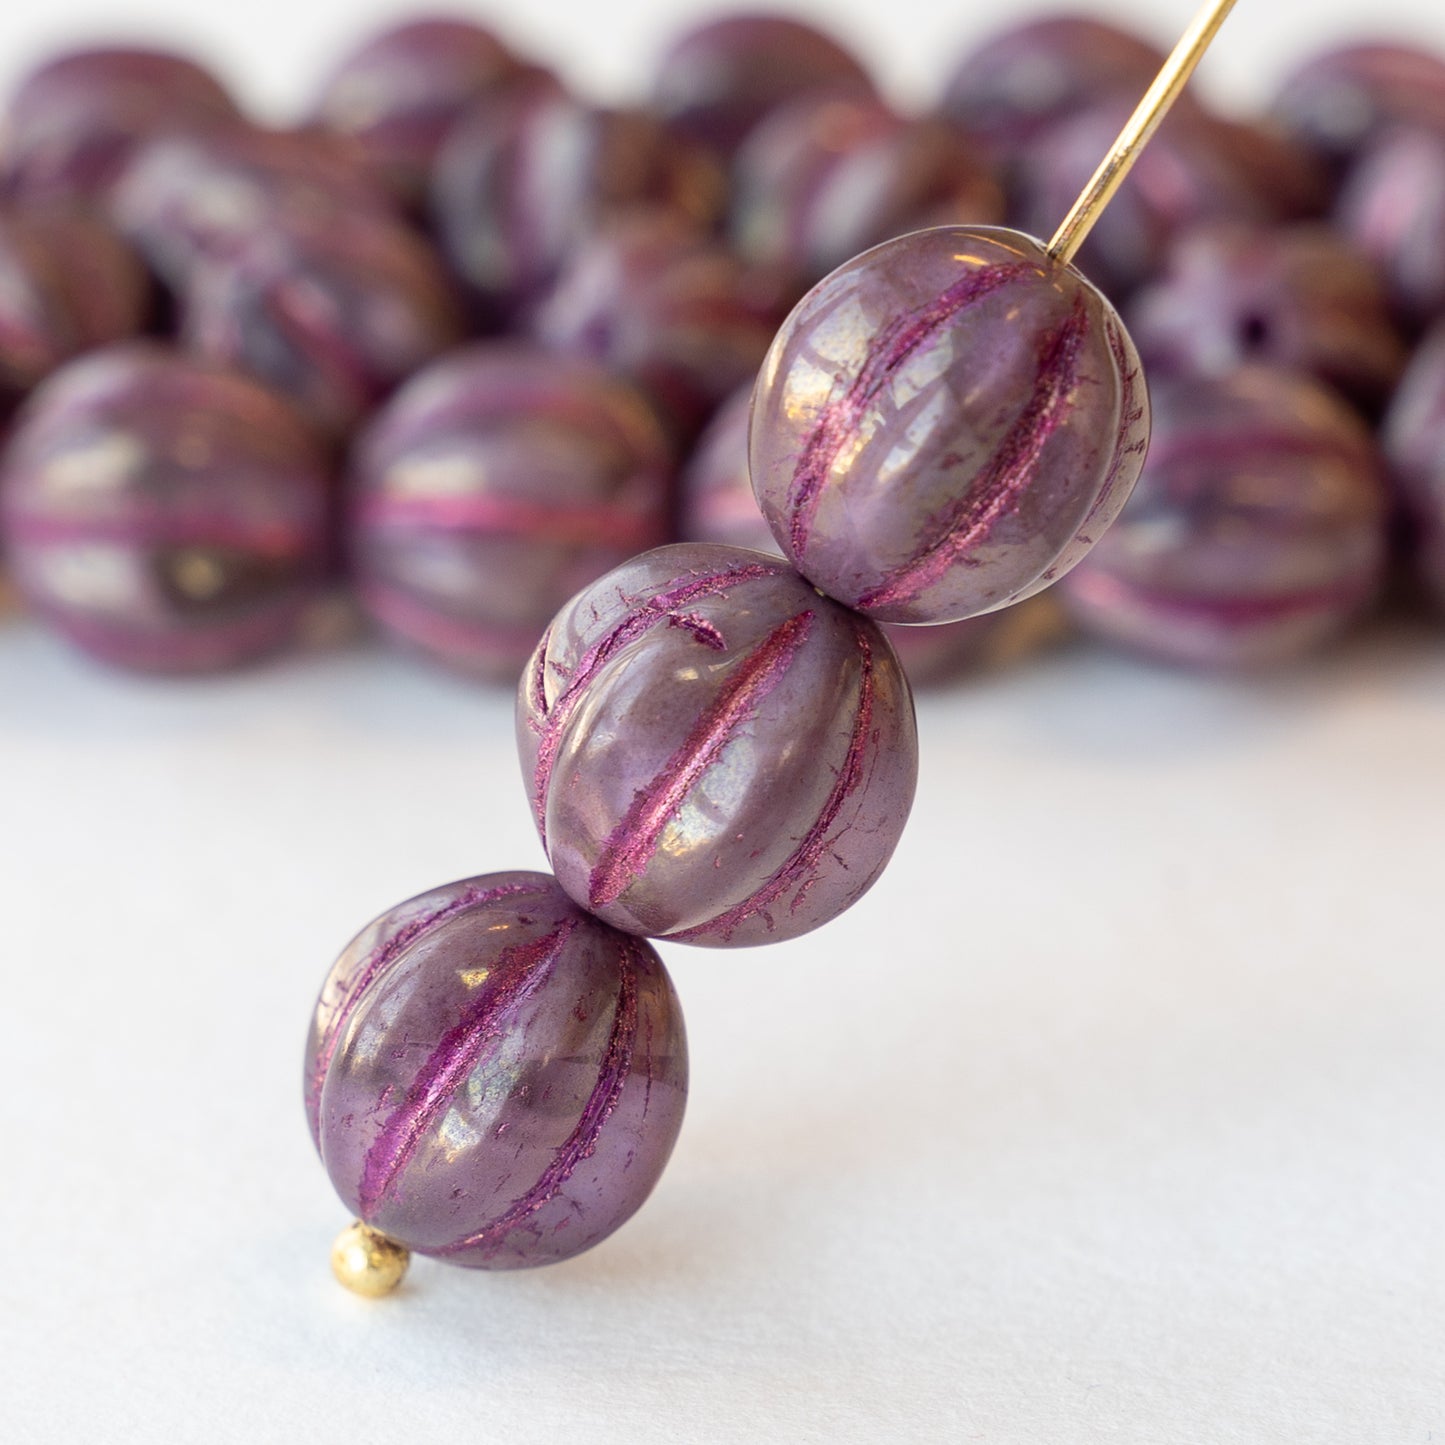 12mm Melon Beads - Purple Golden Luster - 6 or 12